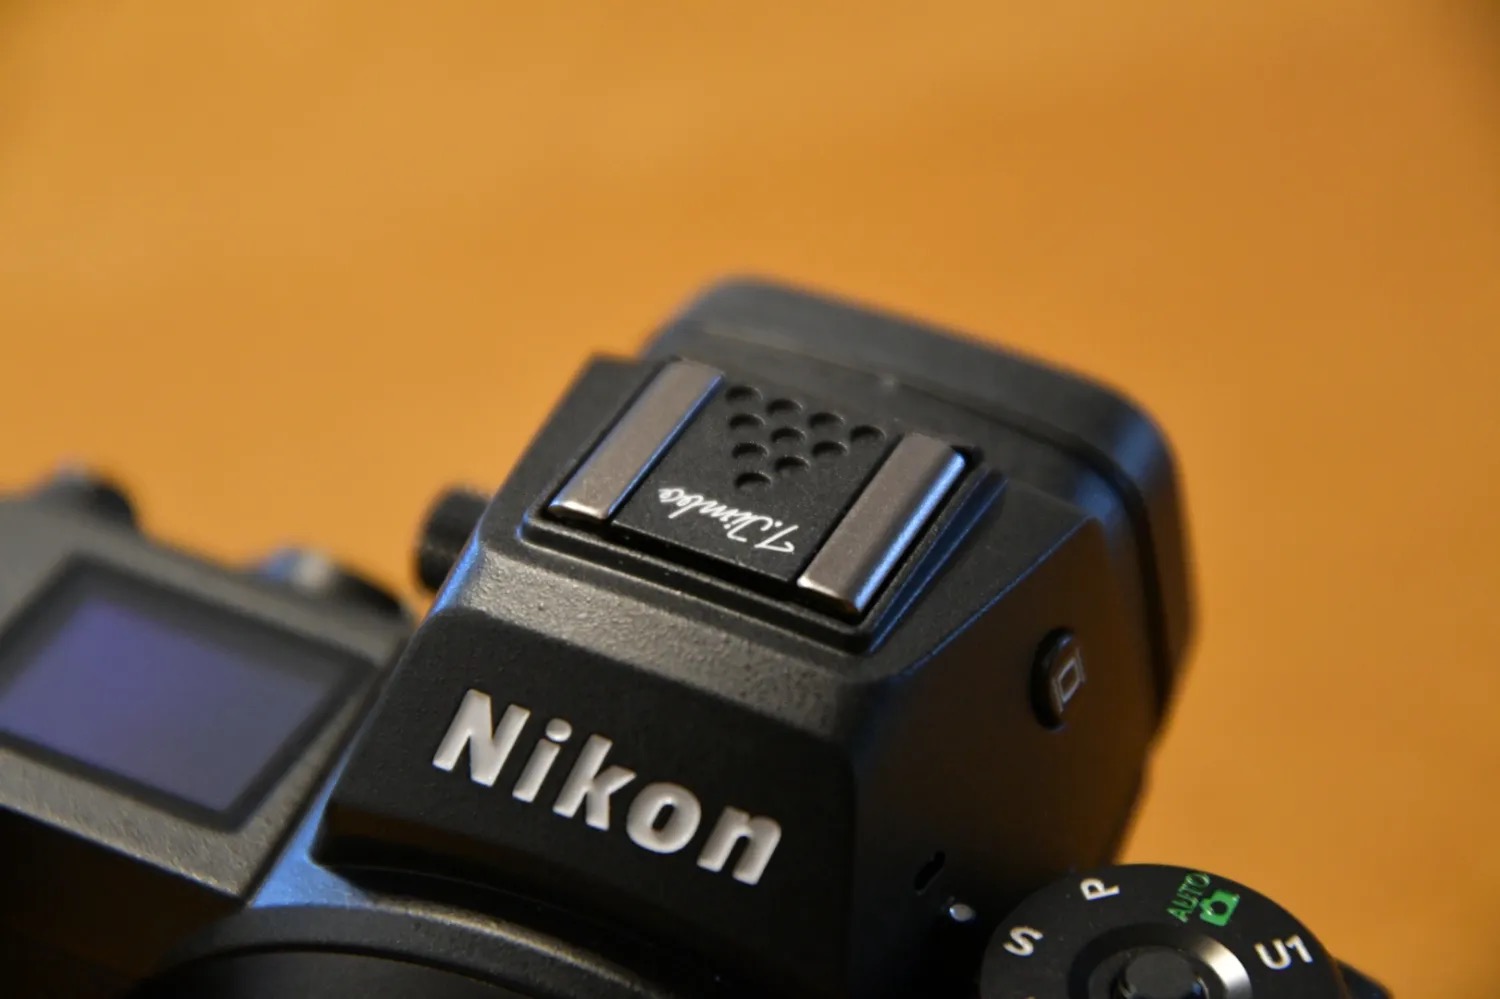 F-Foto accessories for Nikon cameras and lenses are now available 